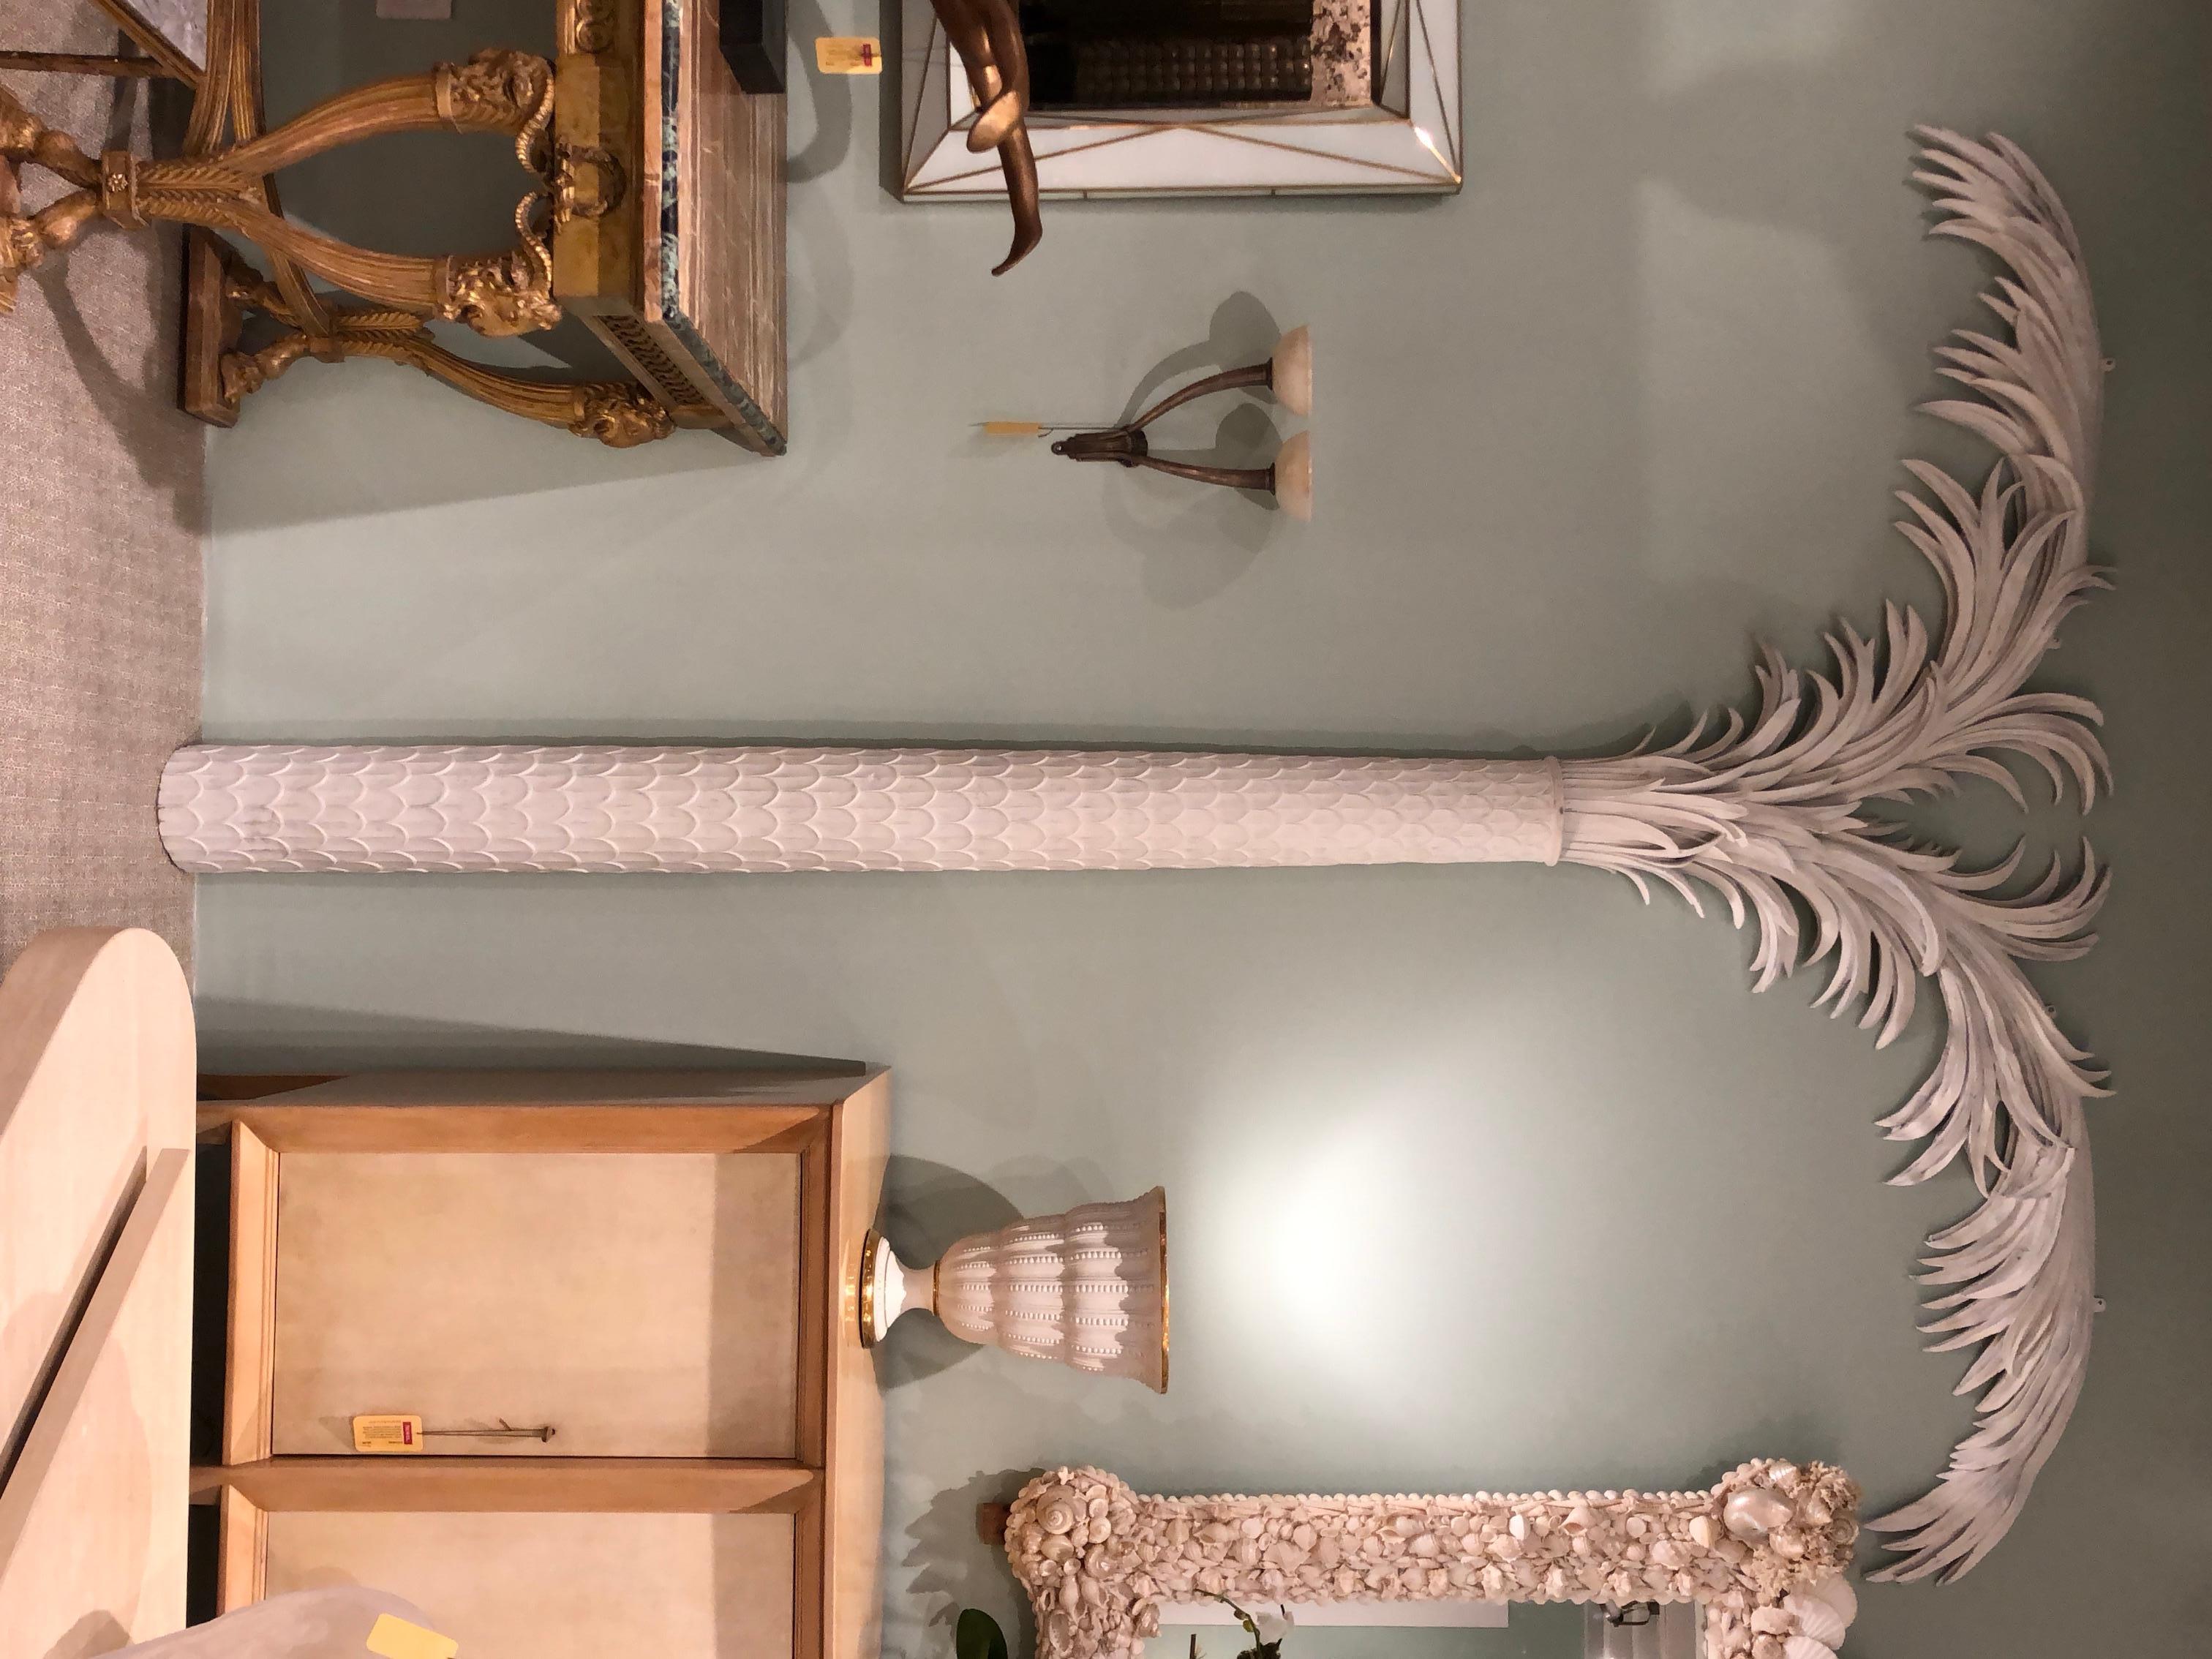 Pair of white resin pilaster palm tree copies of originals by Tate & Hall circa 1930. The New York decorator Marian Hall, of the firm Tate and Hall, commissioned them for Frances and Carl Schmidlapp, an investment banker who bought an apartment at